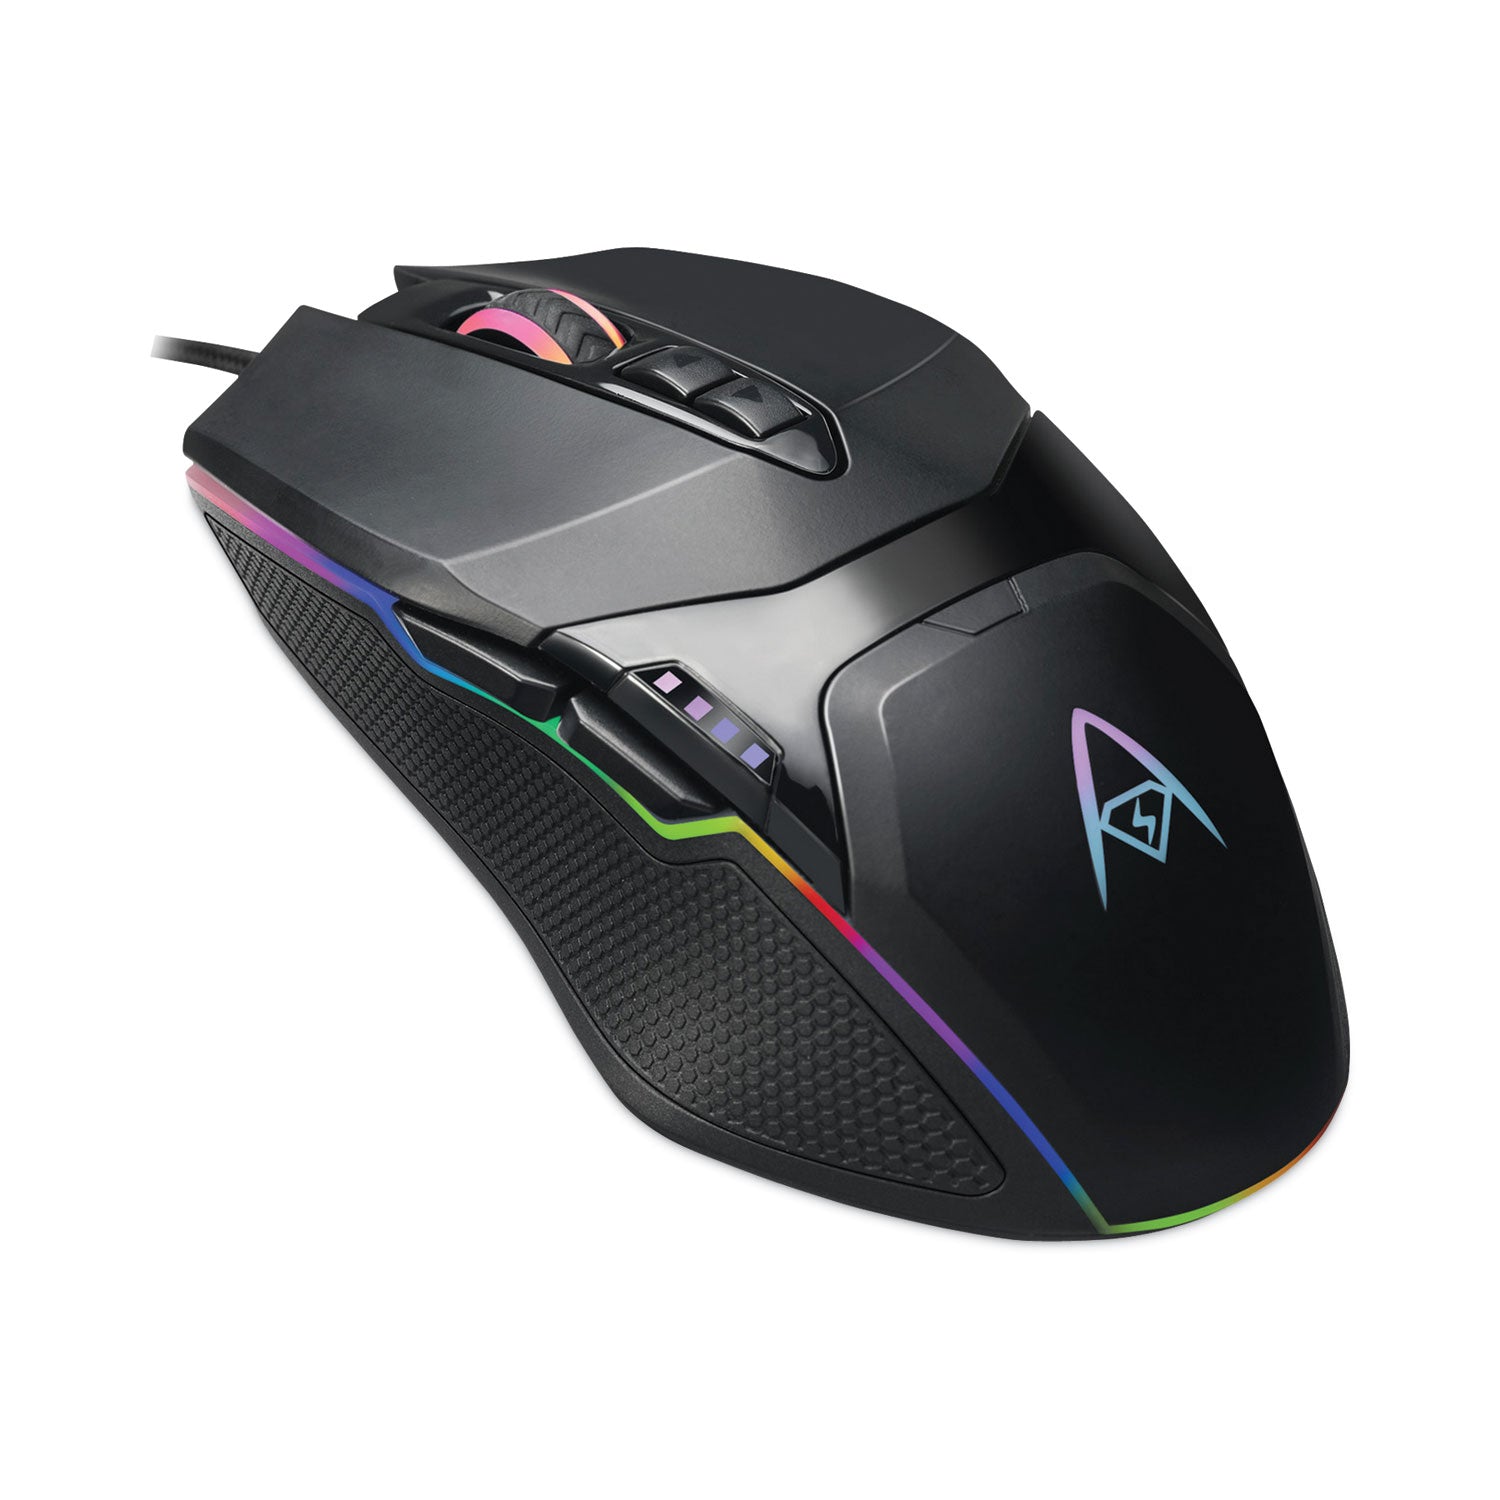 imouse-x5-illuminated-seven-button-gaming-mouse-usb-20-left-right-hand-use-black_adeimousex5 - 1